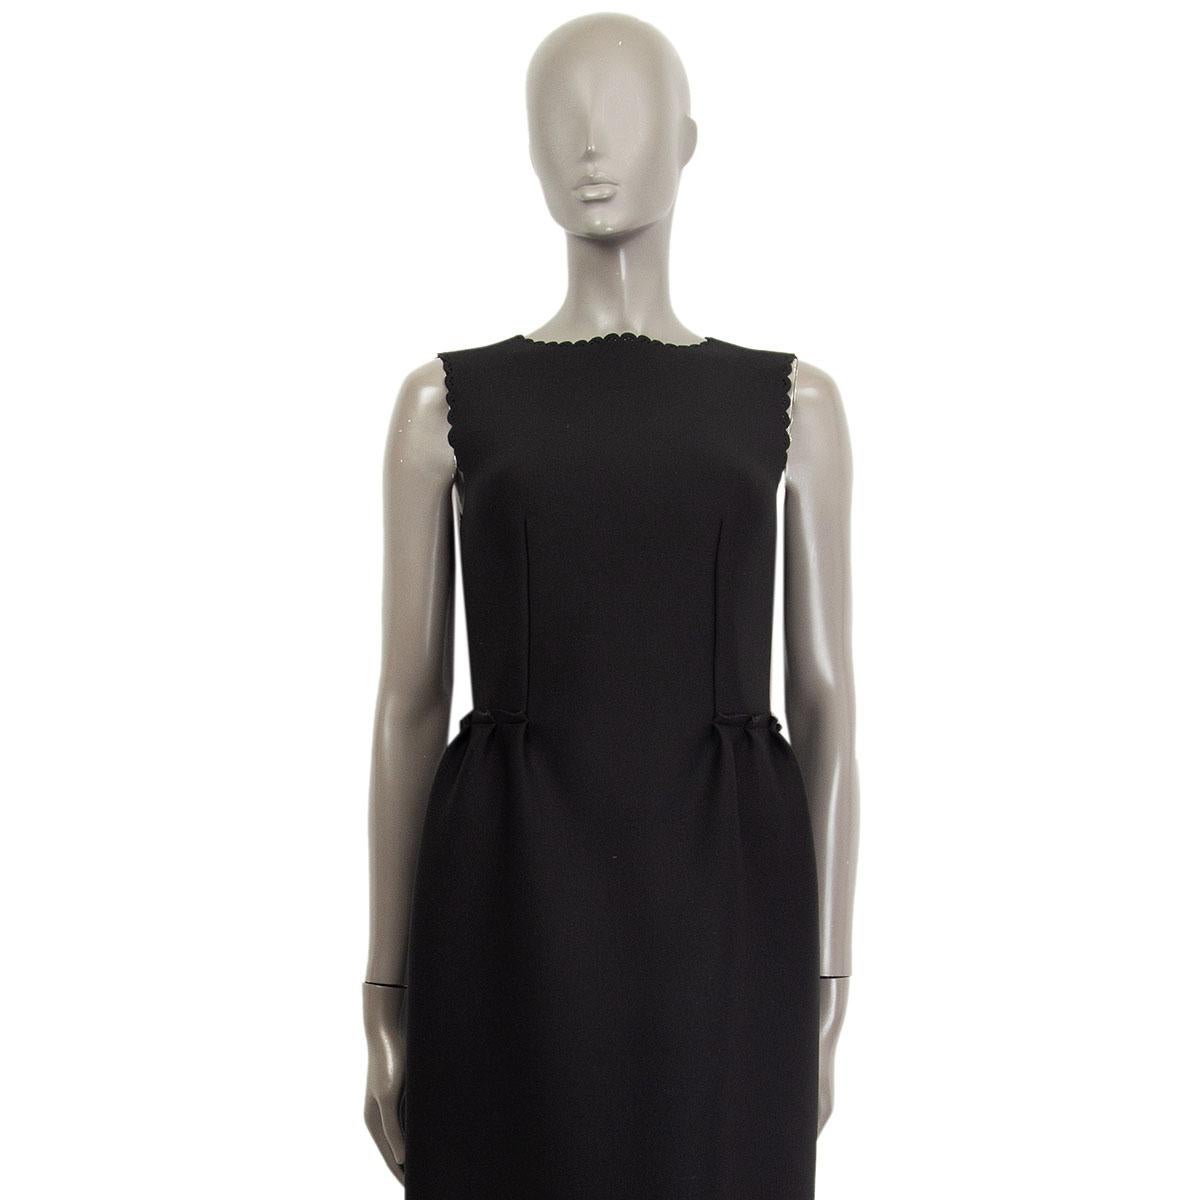 100% authentic Lanvin sheath dress in black polyamide (91%) elastane (9%) with a scalloped edge and a detailed gathered waist. Light-weight neoprene material. Closes with a concealed zipper in the back. Has been worn and is in excellent